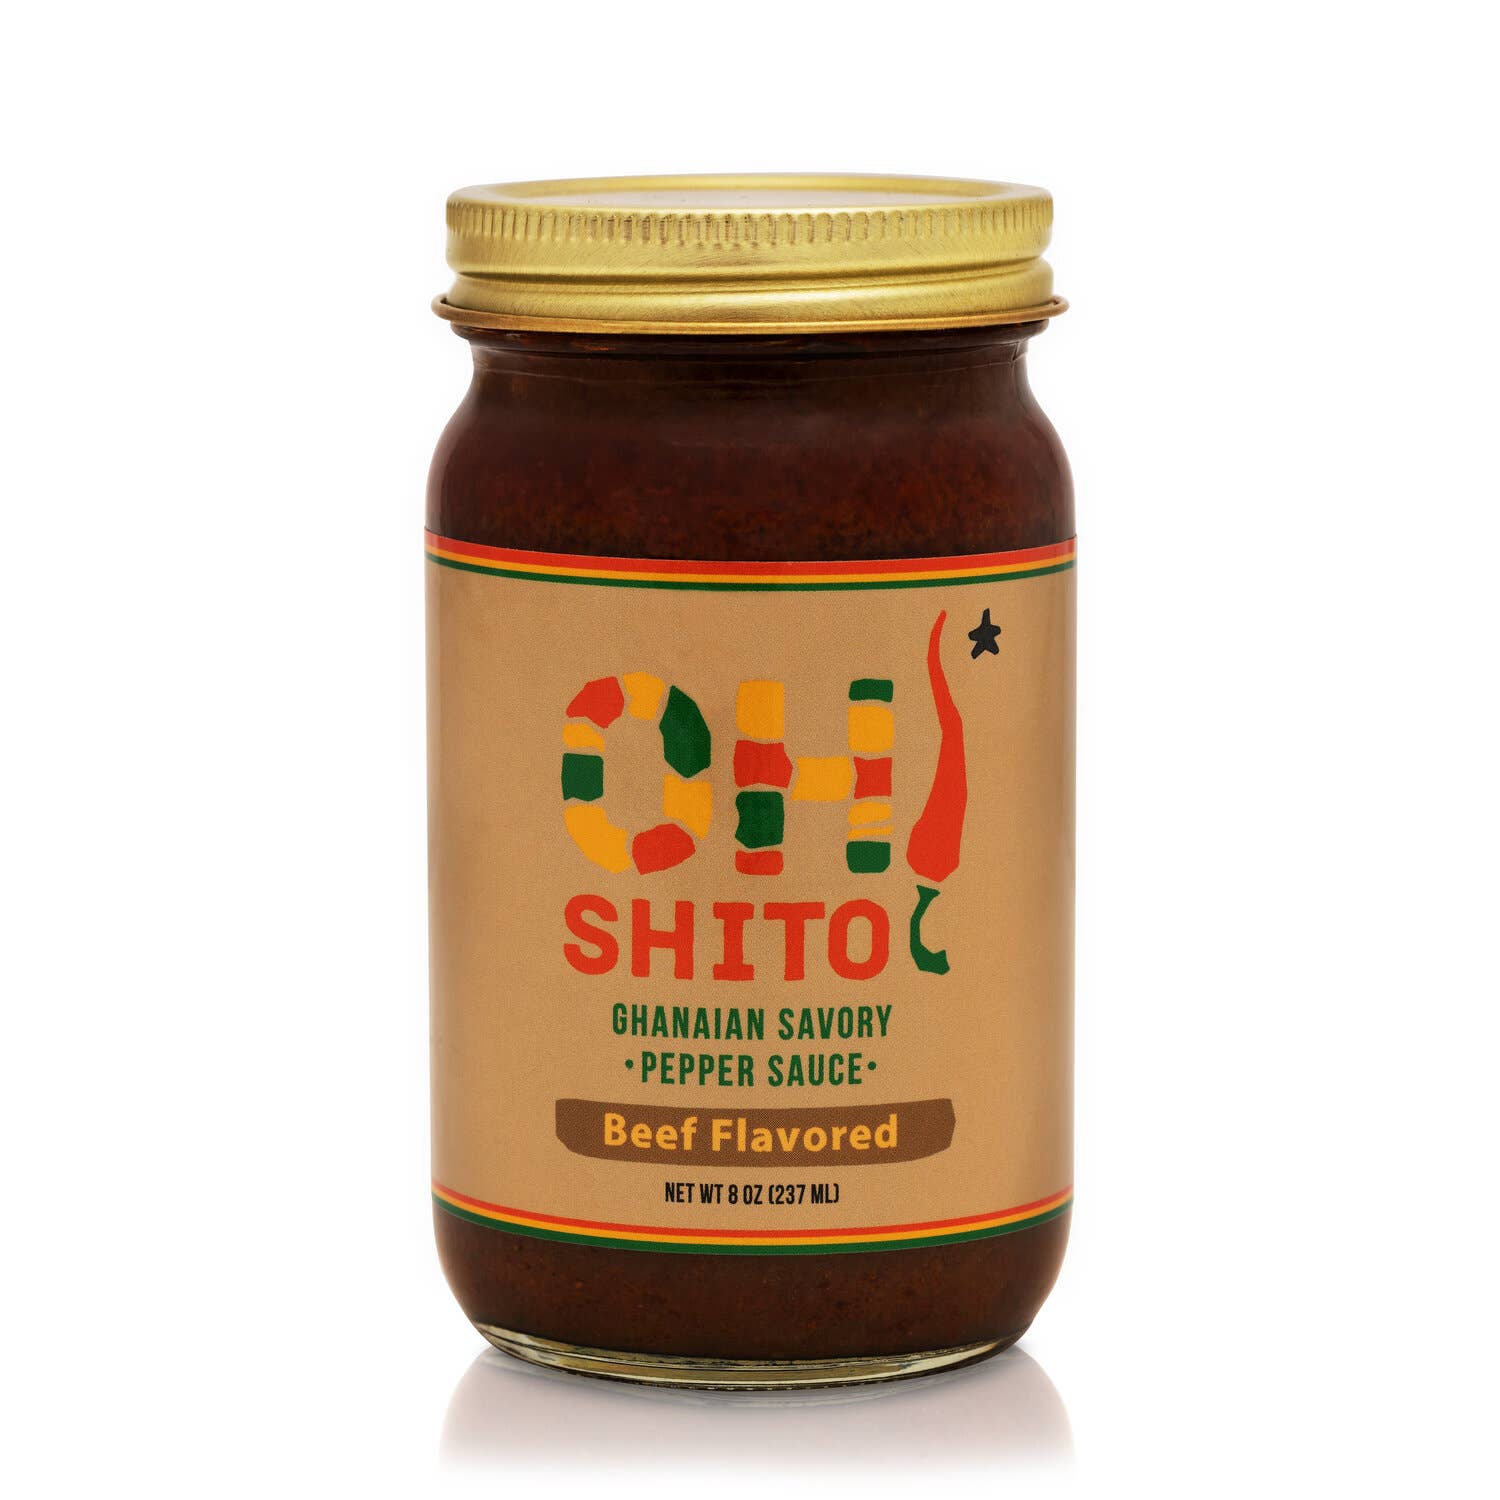 Learn How To Make The Ghanaian Spicy Pepper Sauce, Shito.